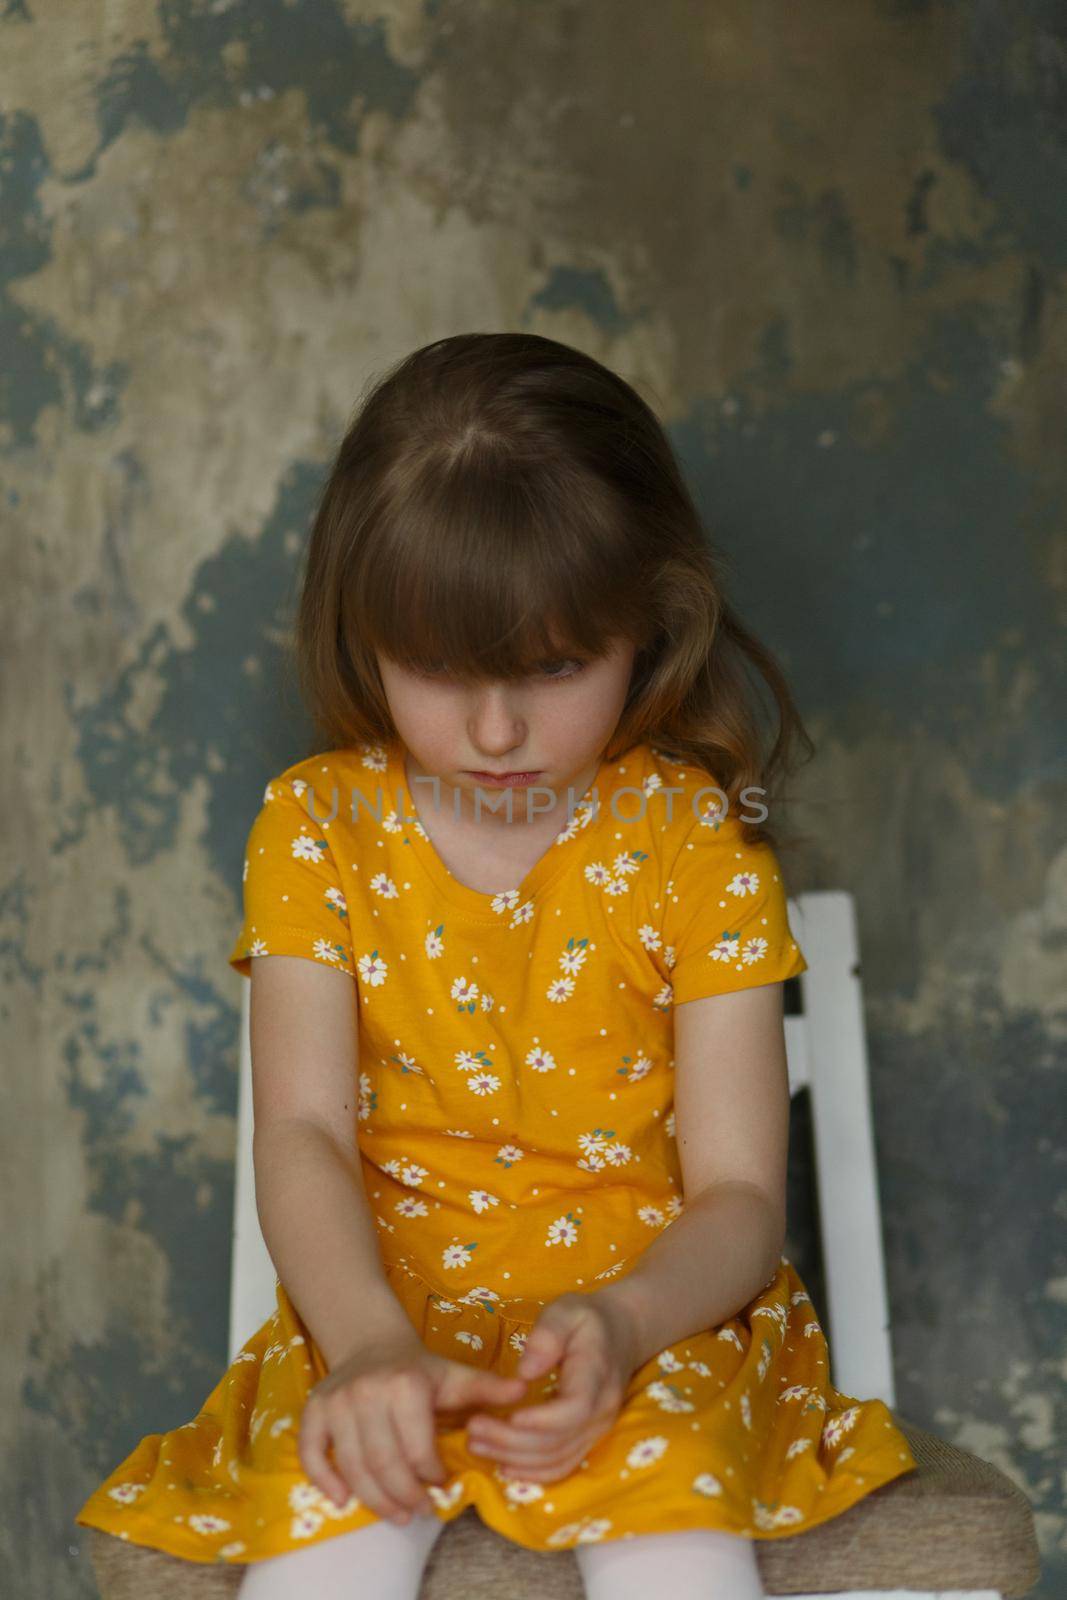 Portrait of a little upset girl in a yellow dress sitting on a chair on an abstract blue background.